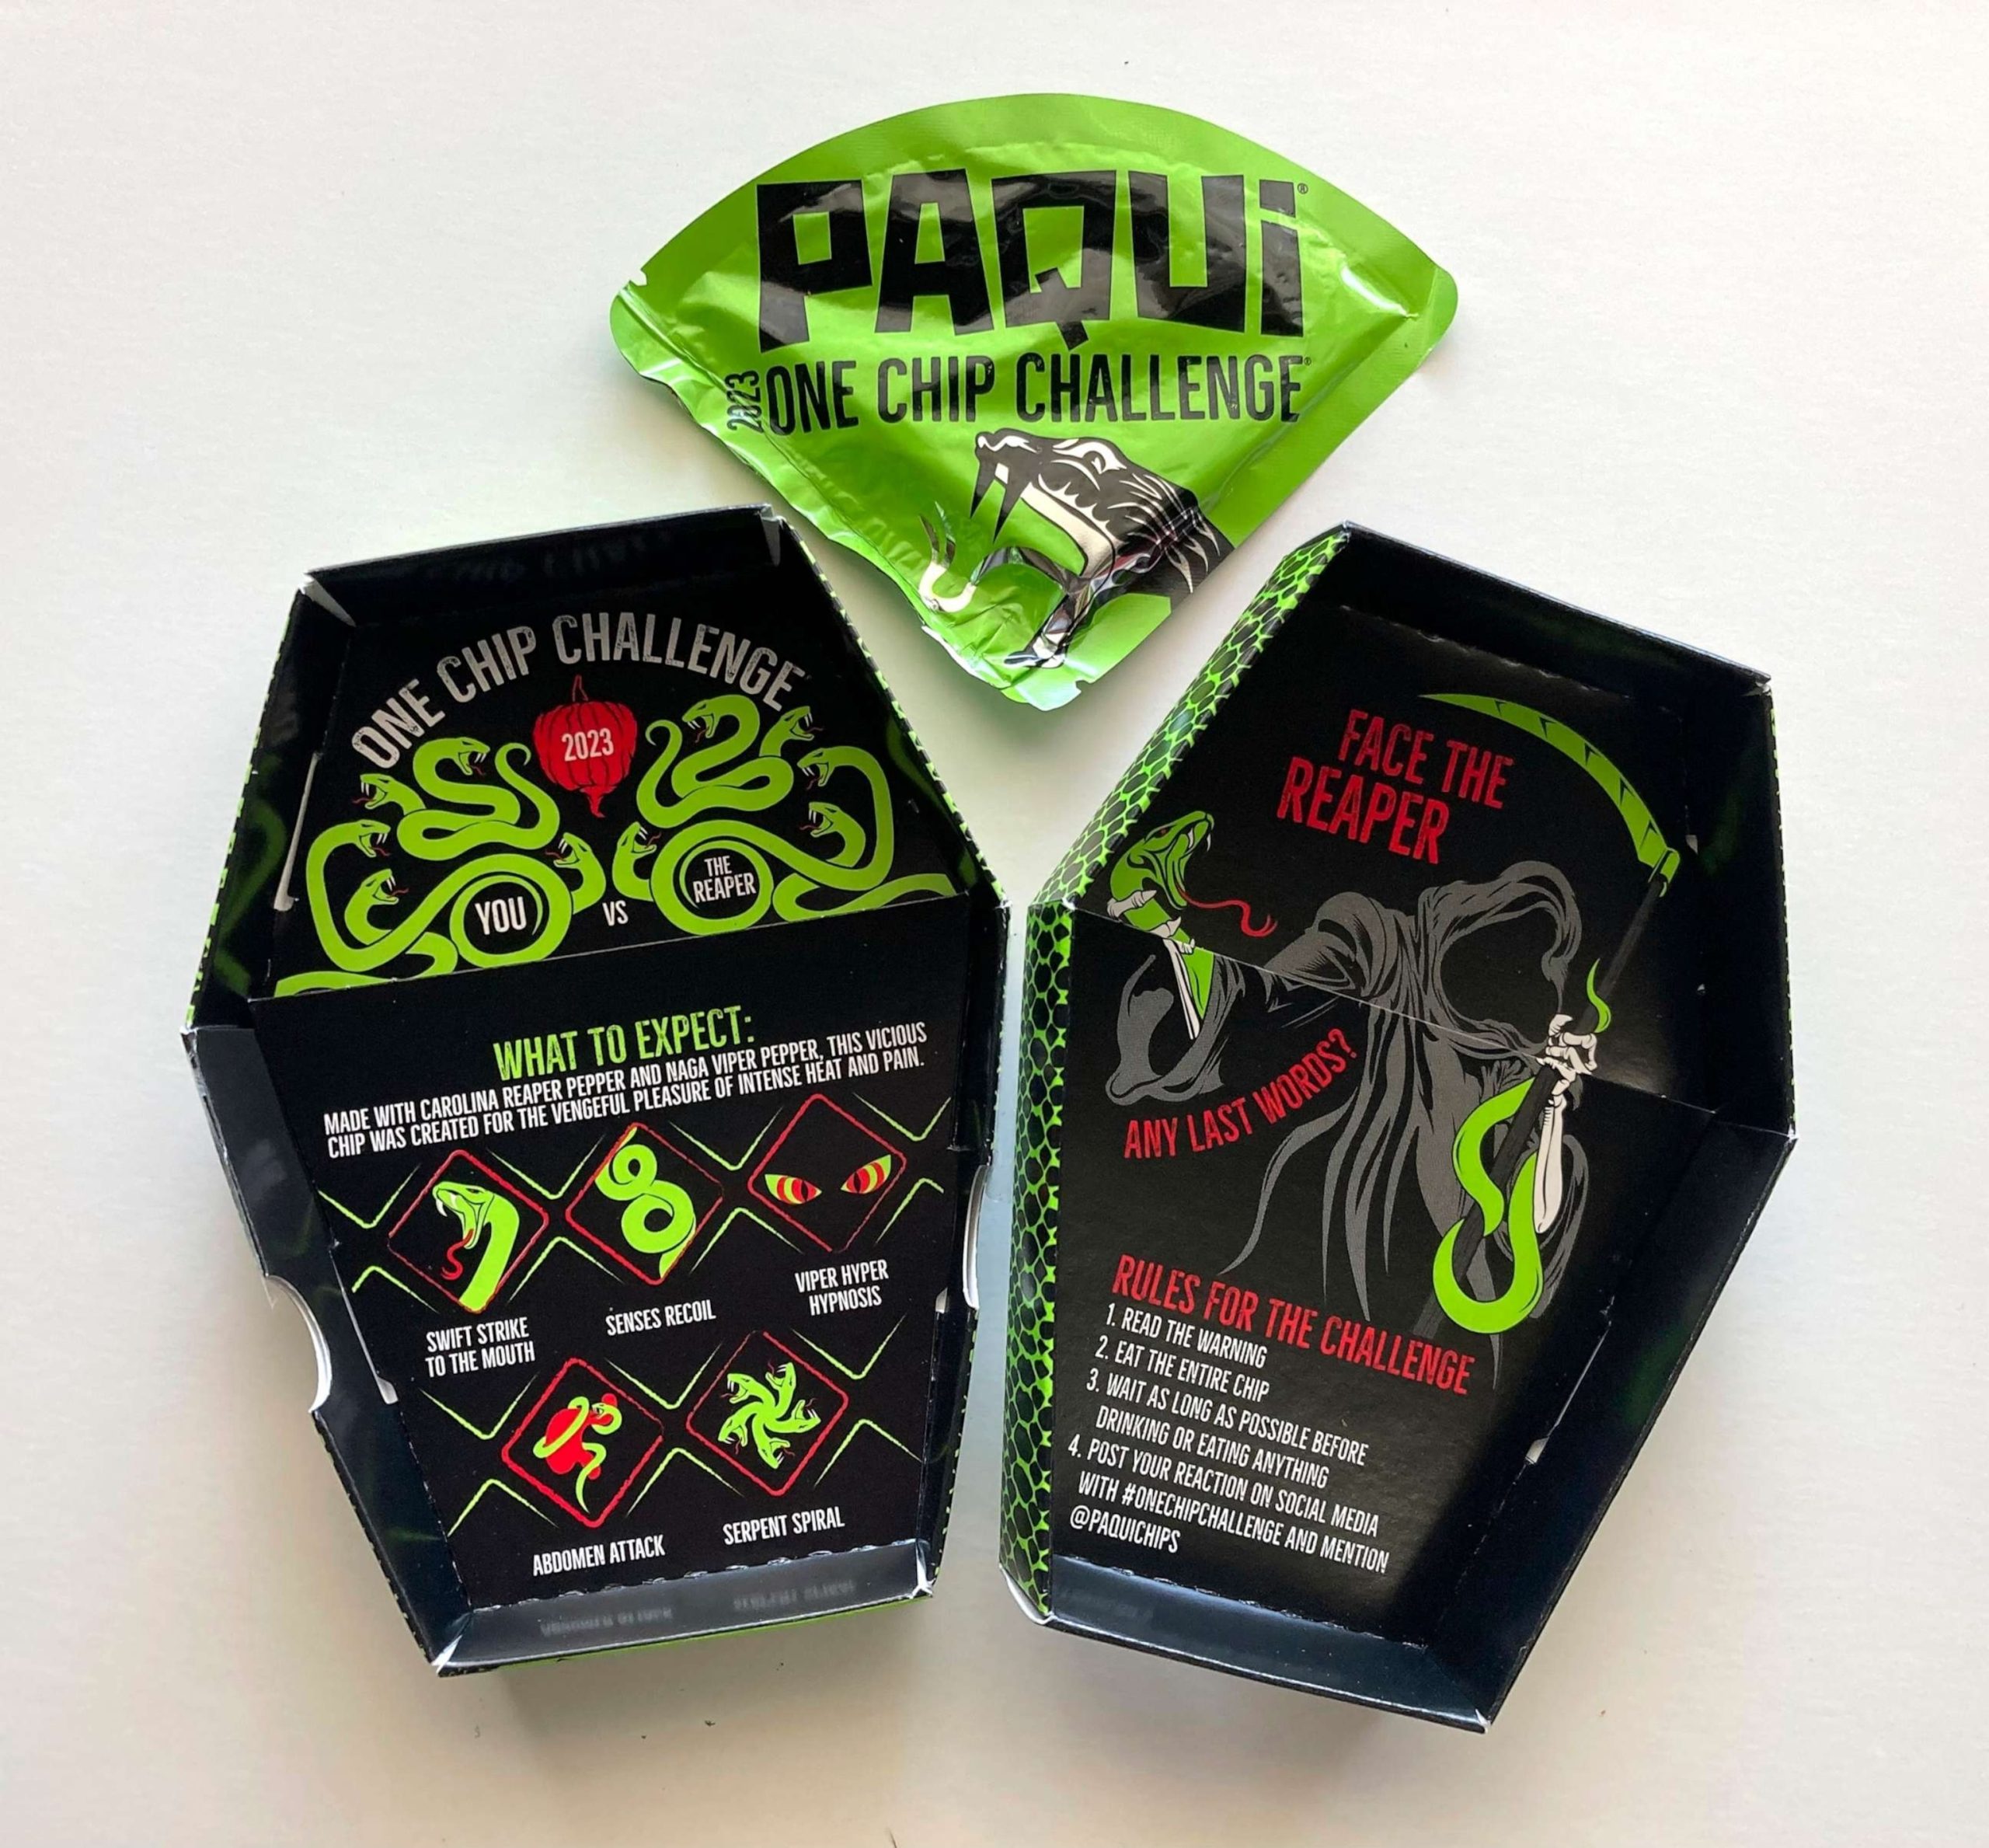 Paqui removes 'One Chip Challenge' product from store shelves US